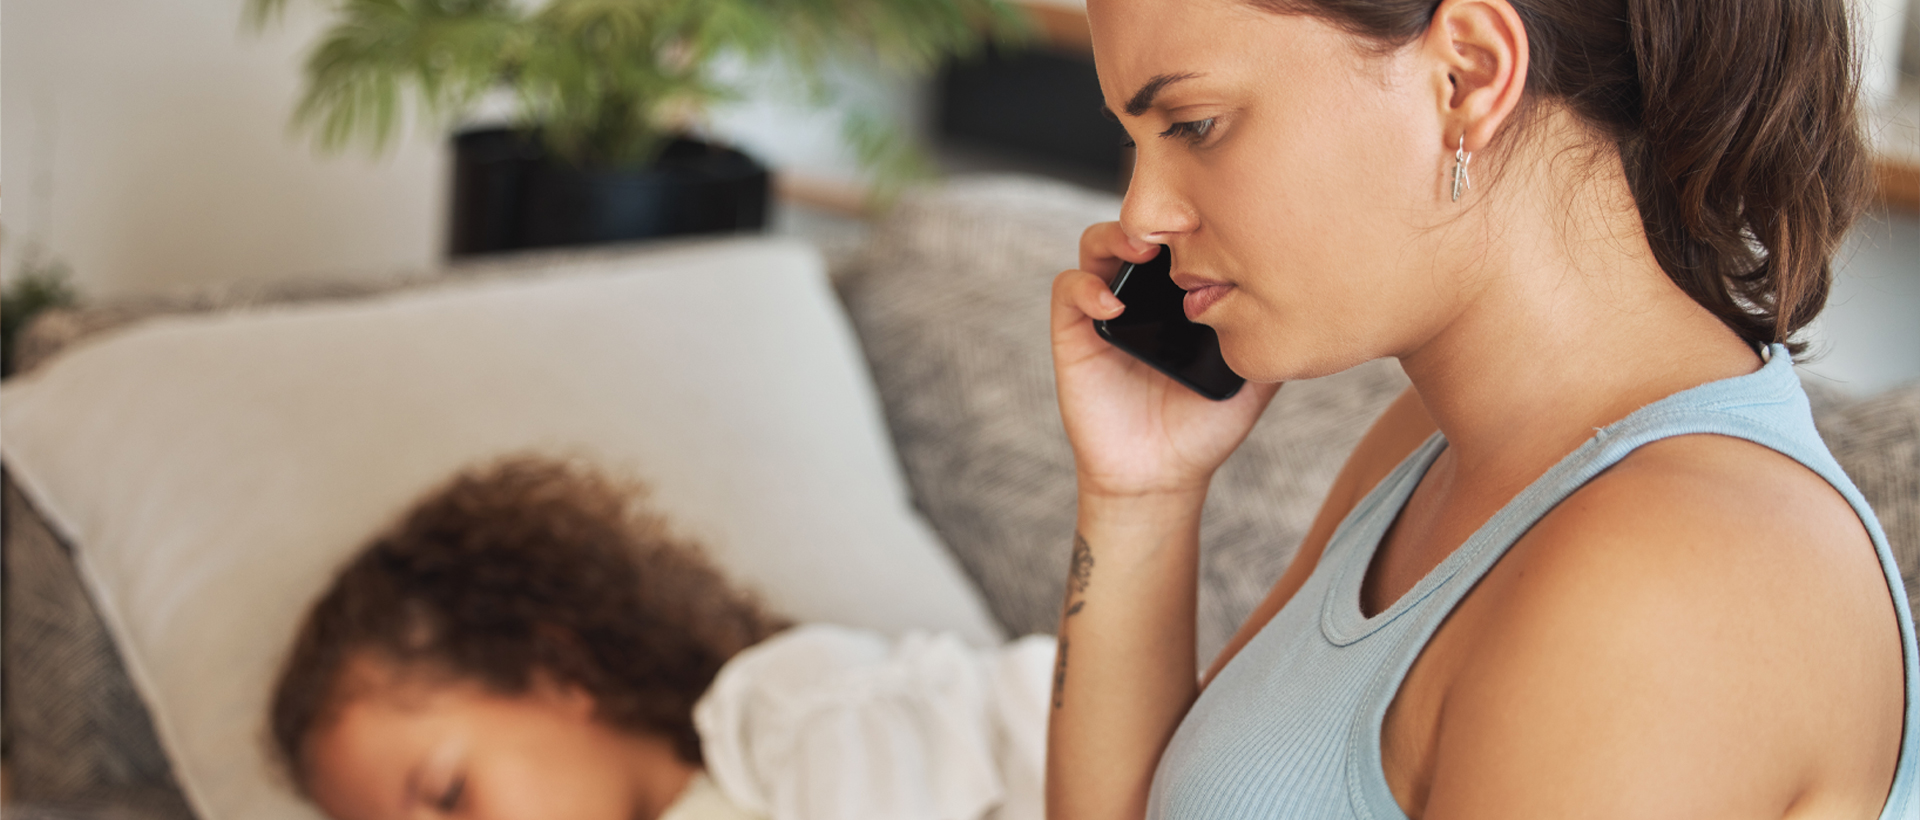 Concerned woman on phone with sleeping child near.